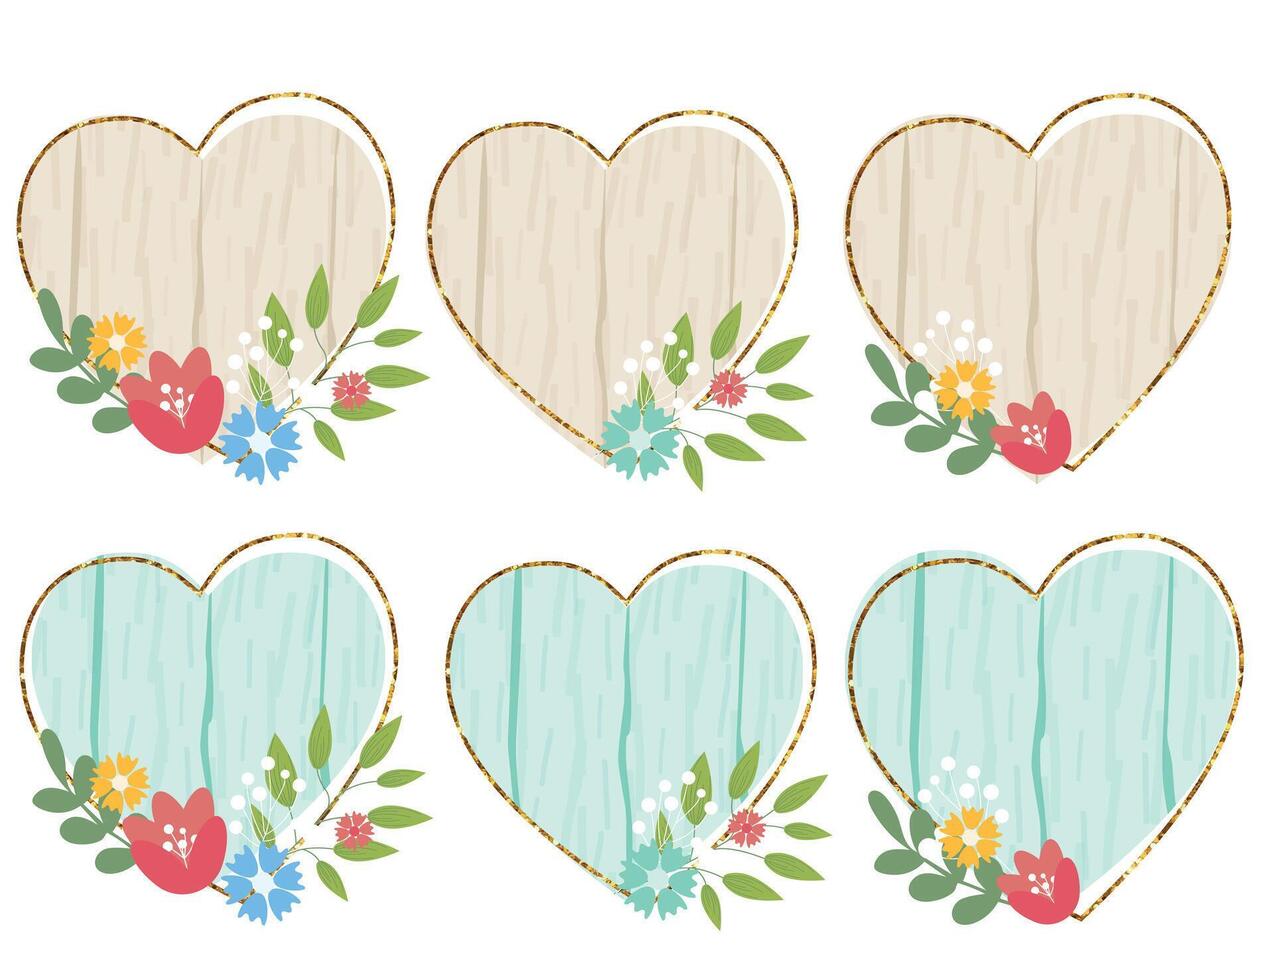 Wooden design elements set with flowers. wood board, frame, badge, label, shield, signboard collection. Brown background without text. illustration. vector